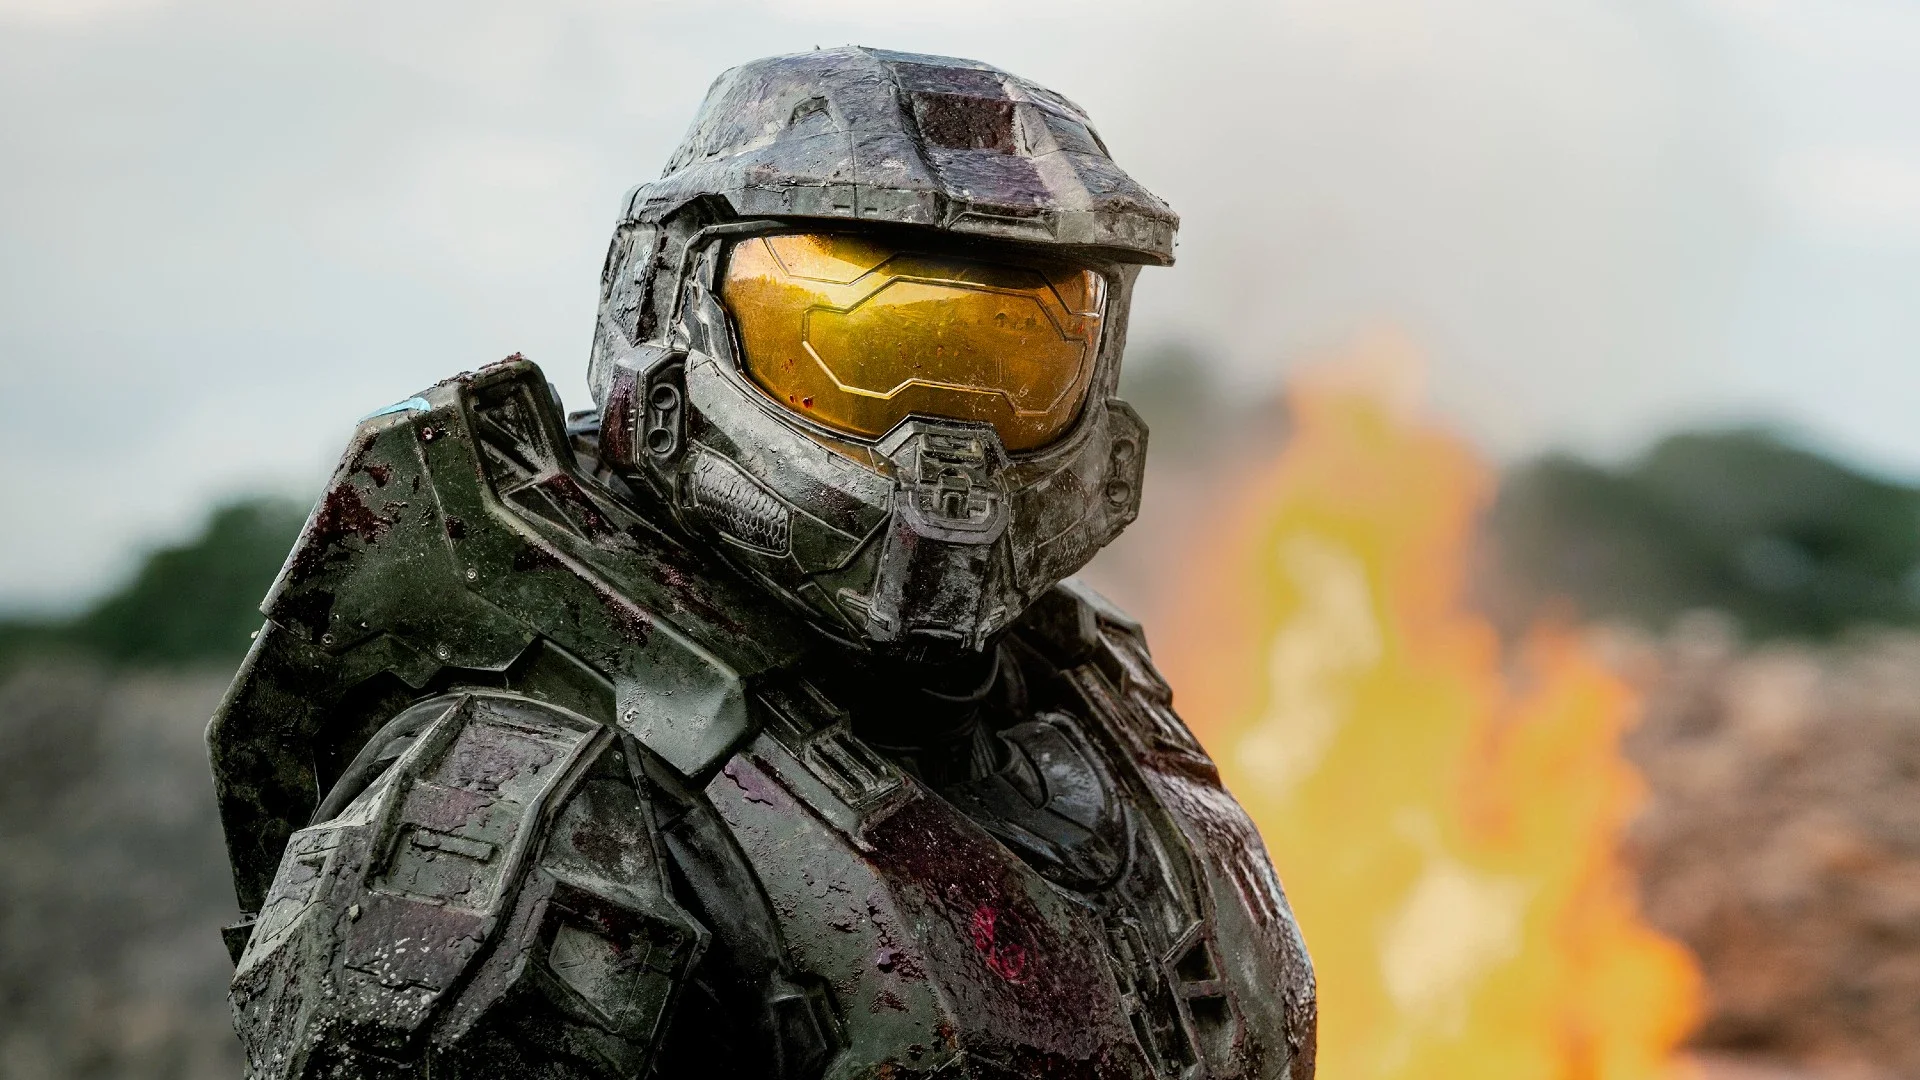 It's not just the helmet that takes off, the "Halo" American drama Master Chief strips off to show his muscles